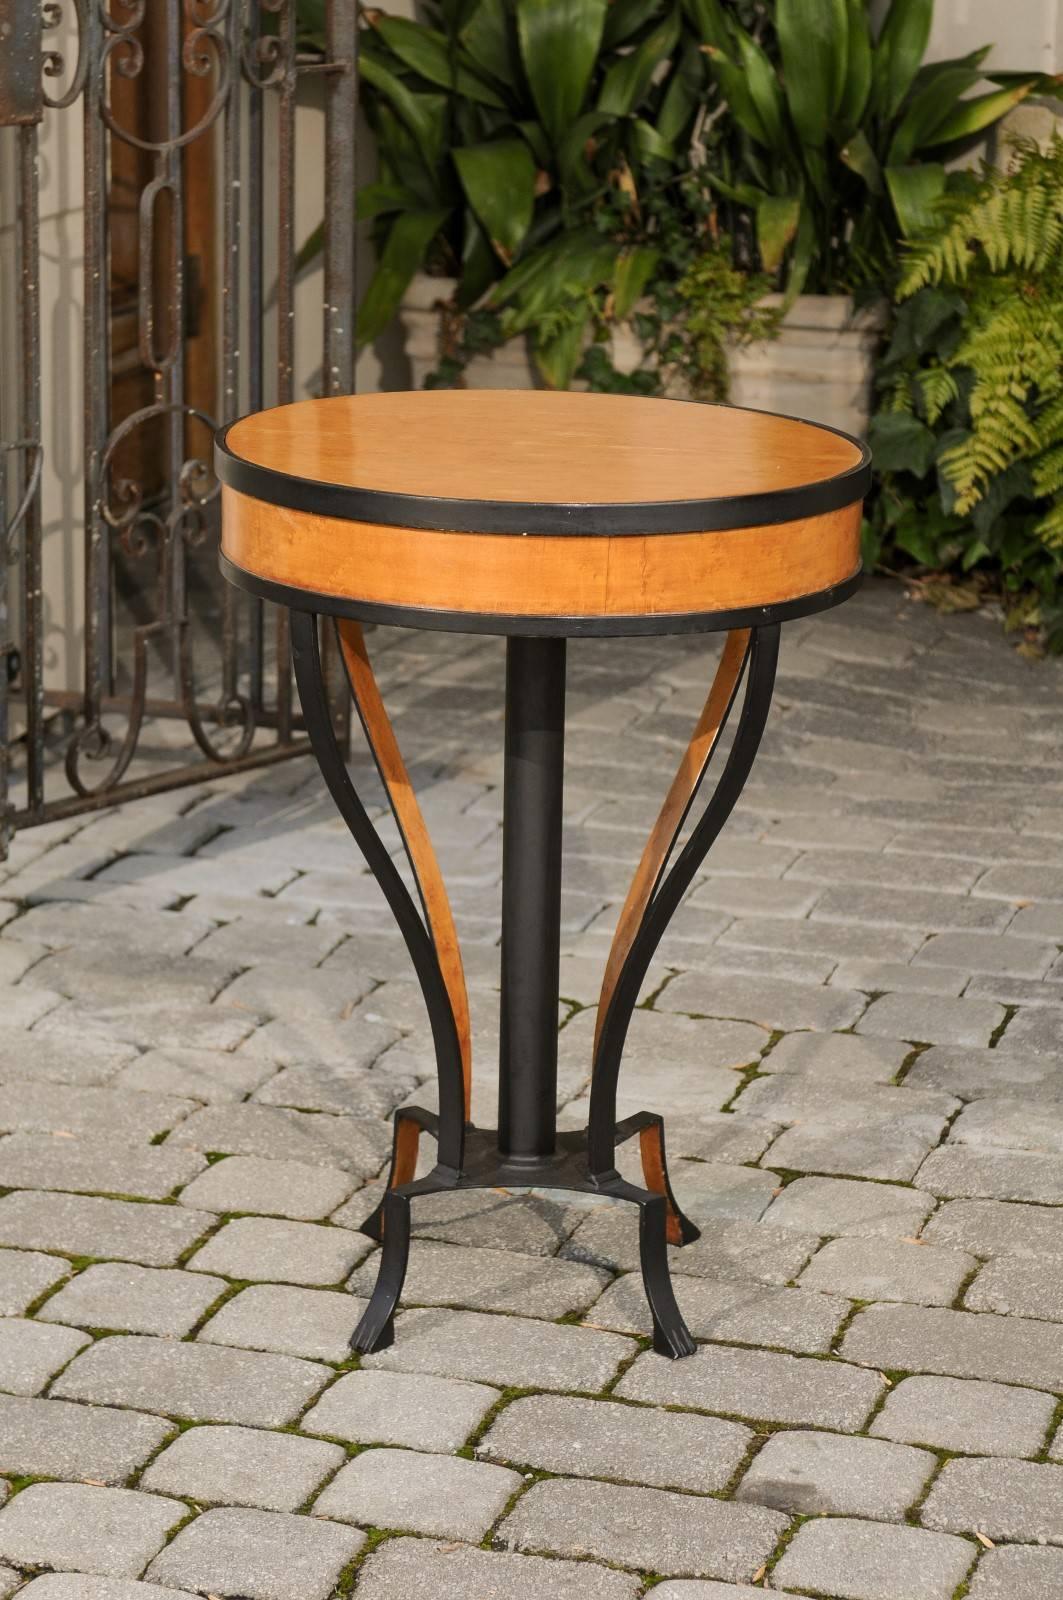 An Austrian Biedermeier period guéridon side table with burl veneer and iron base from the early 19th century. This Biedermeier guéridon features a circular top made of burl veneer, accented by a black iron armature. This alternating pattern is